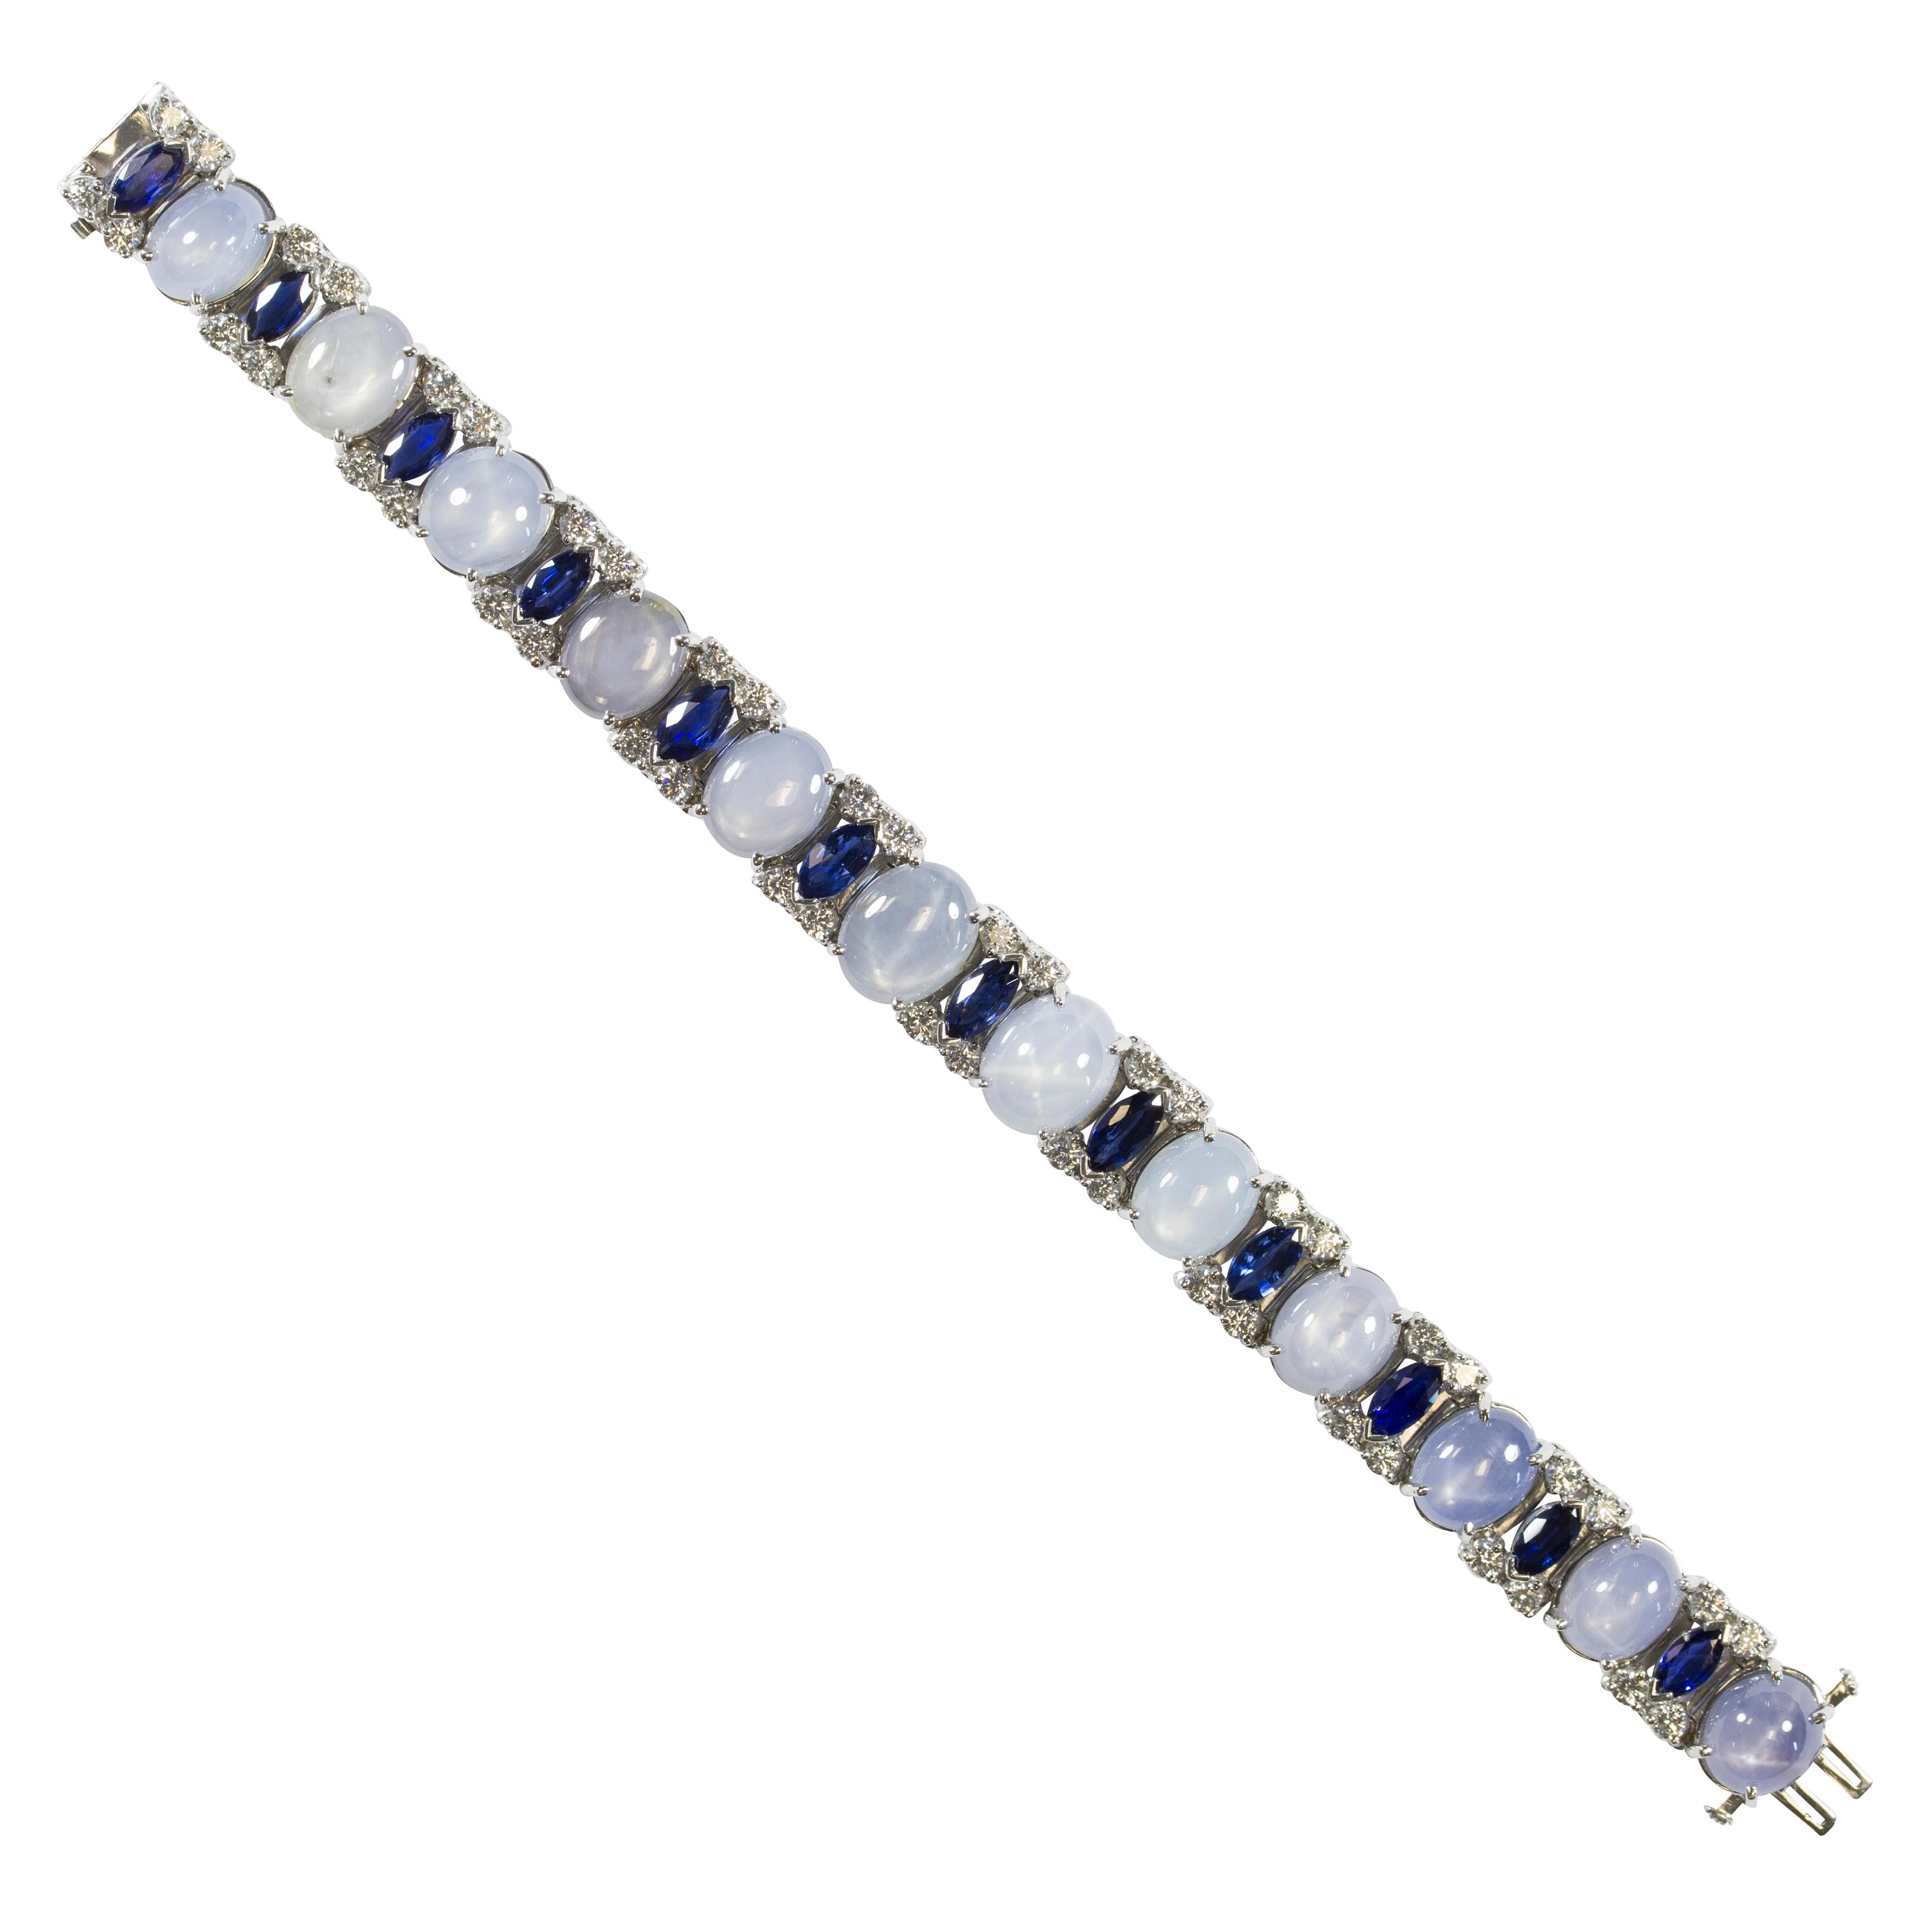 Oscar Heyman platinum bracelet contains 12 Cabochon Ceylon Star Sapphires (87.25tcw, CDC report), 12 Marquise Sapphires weighing 7.82tcw, and 48 Round Diamonds weighing 3.68tcw. It is stamped with the makers mark, IRID PLAT, and serial number